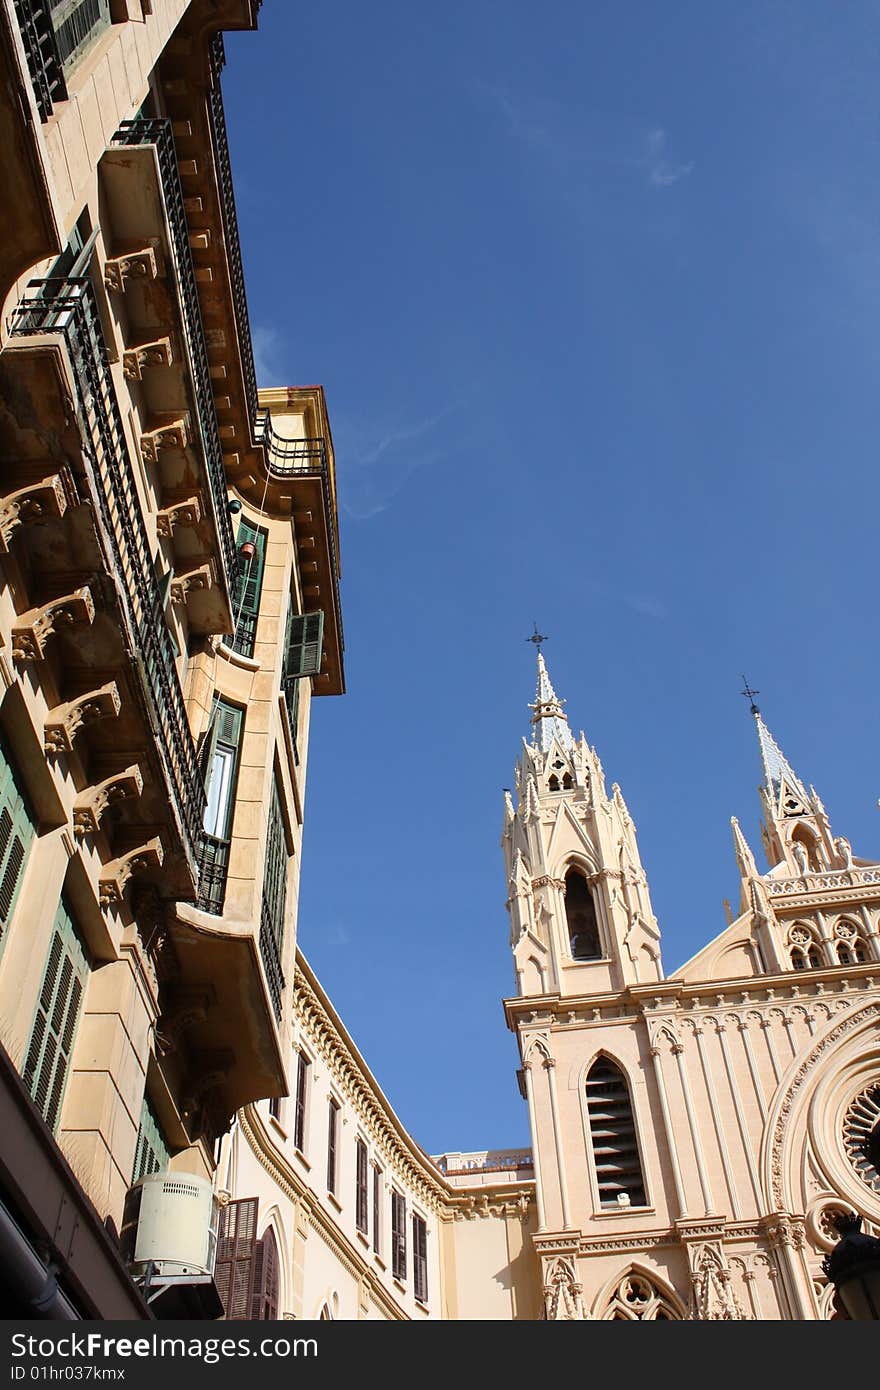 Facade of a church and surrounding buildings in the historic centre of Malaga on the southern coast of Spain. Facade of a church and surrounding buildings in the historic centre of Malaga on the southern coast of Spain.